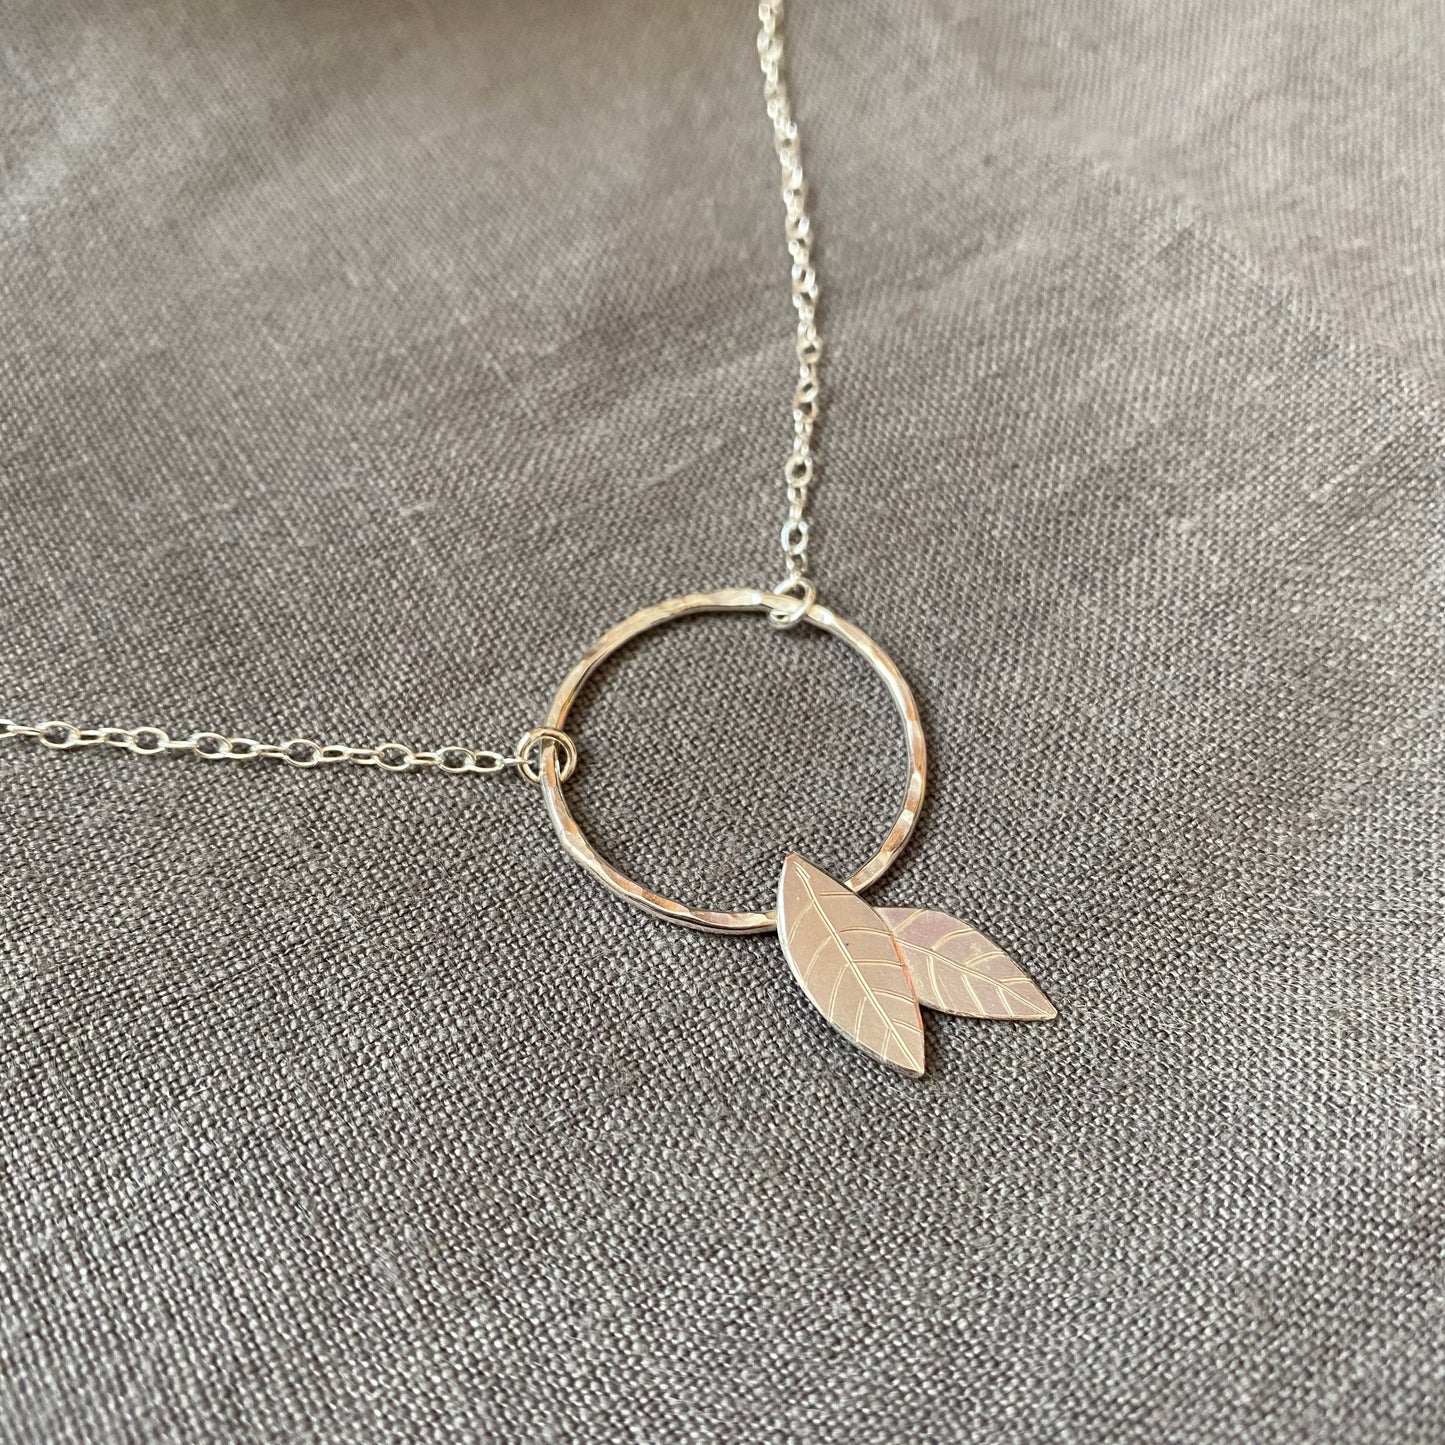 Silver leaves necklace